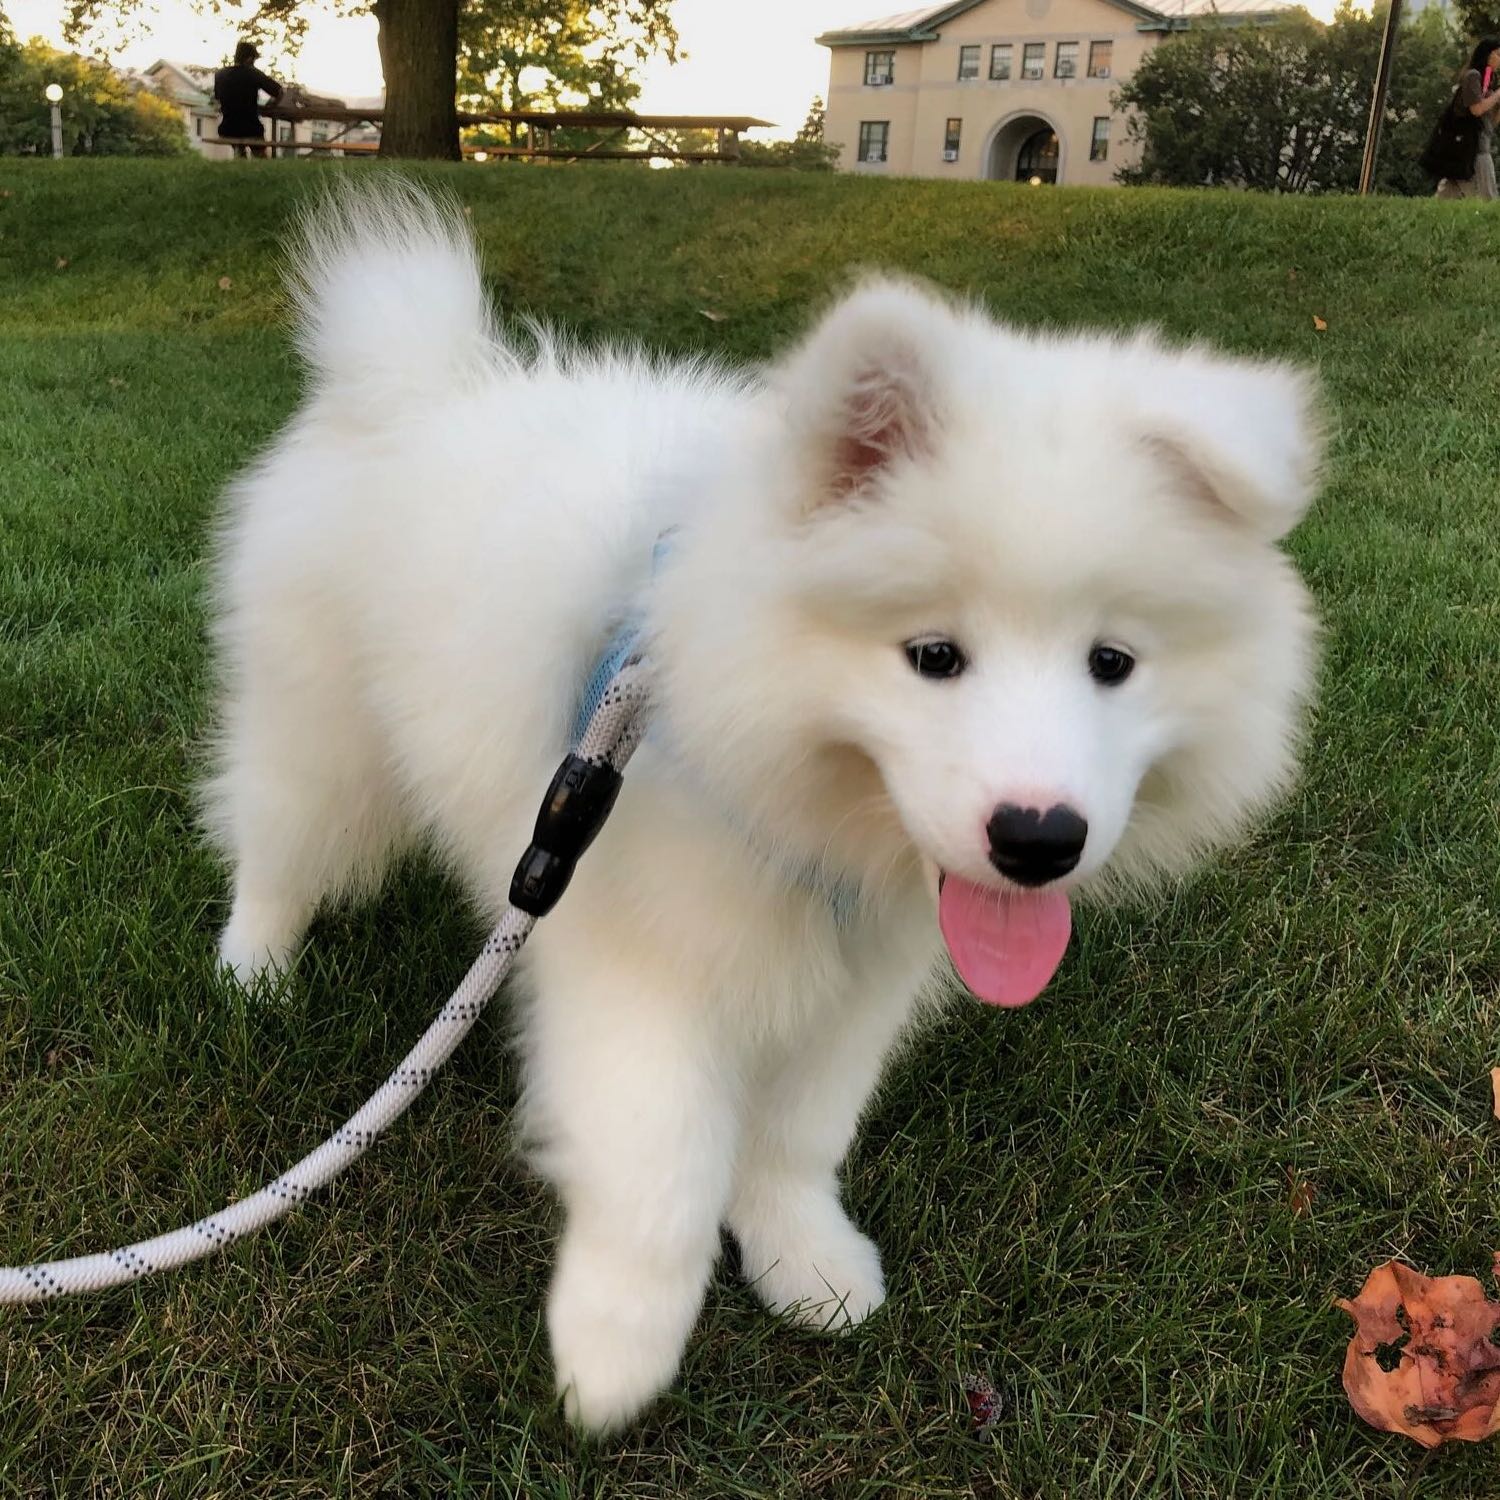 I am Cloud. I am an adorable white Samoyed puppy.